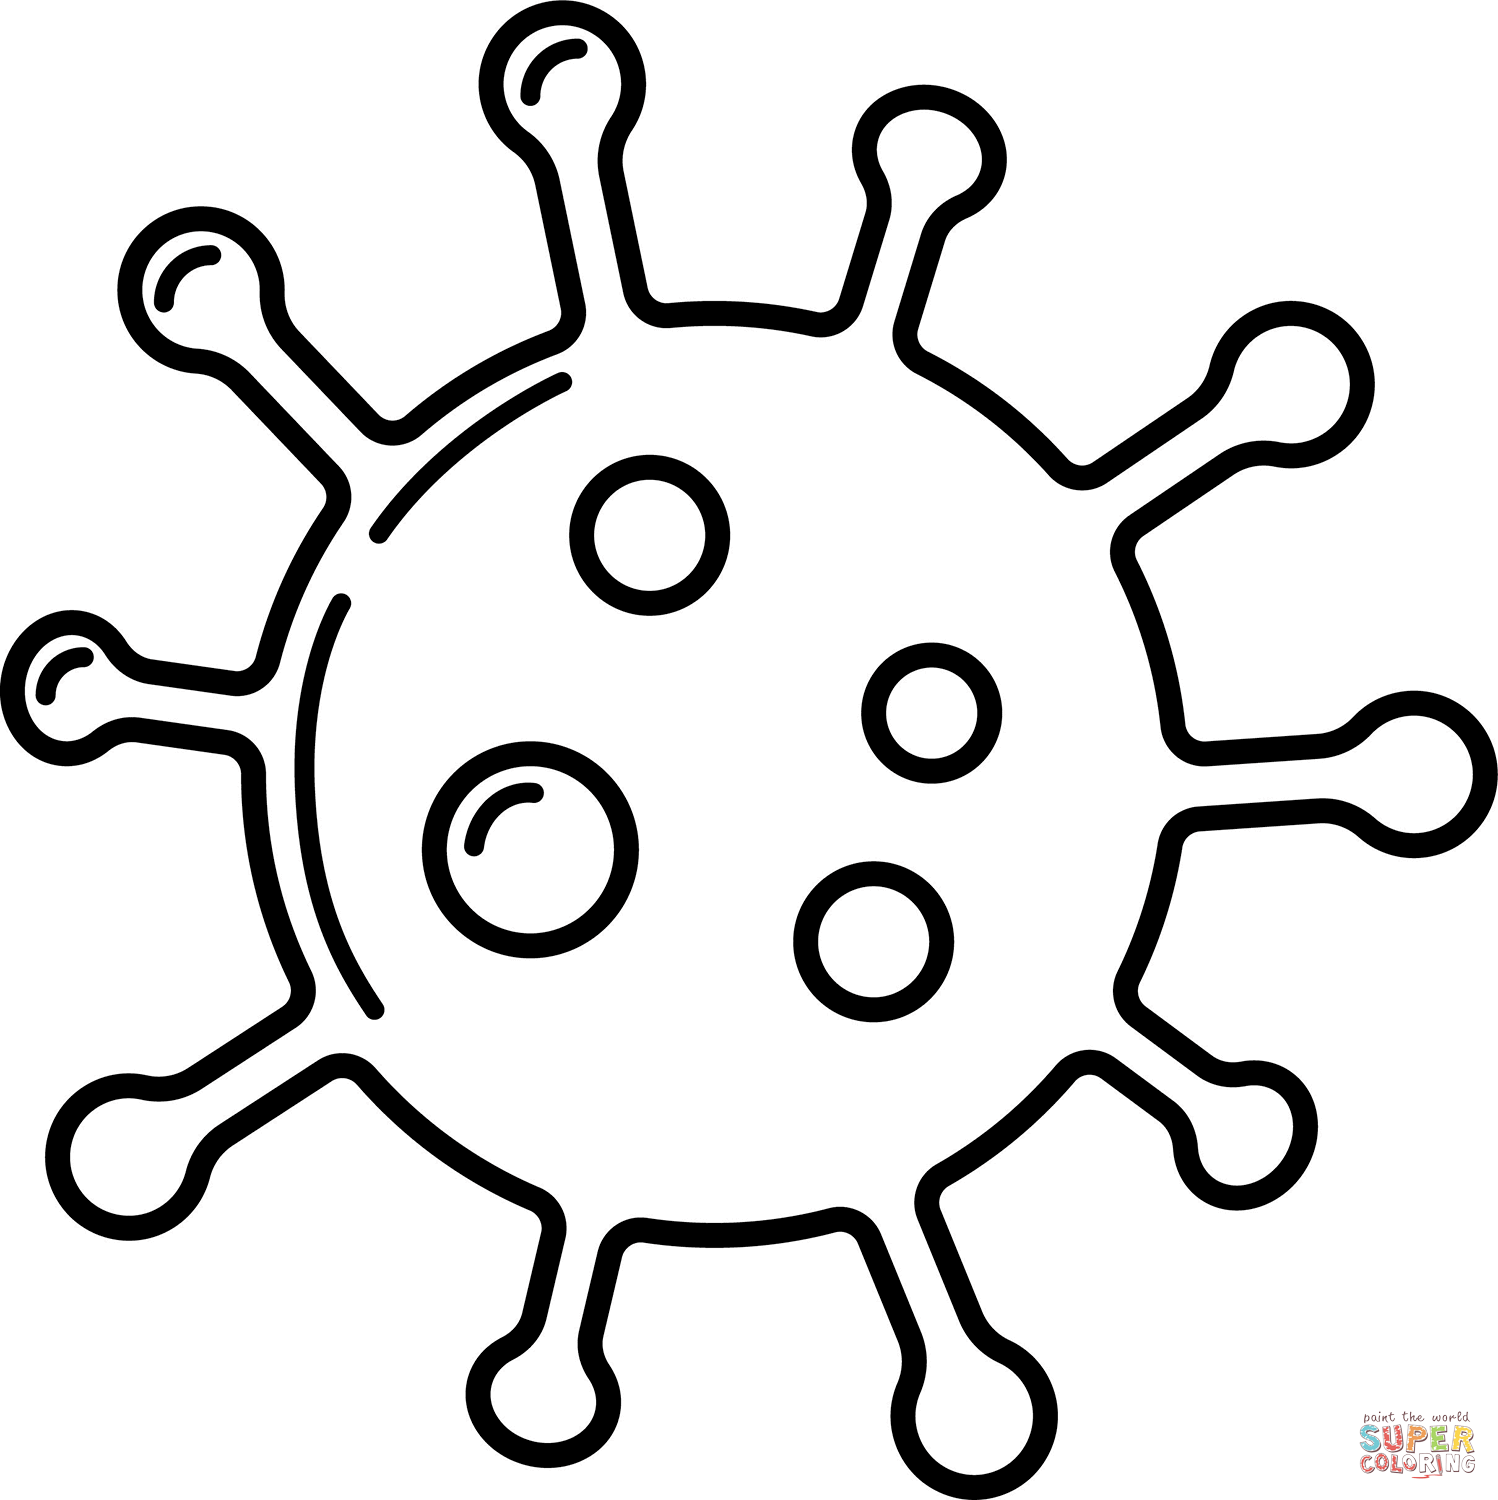 Germ coloring page free printable coloring pages